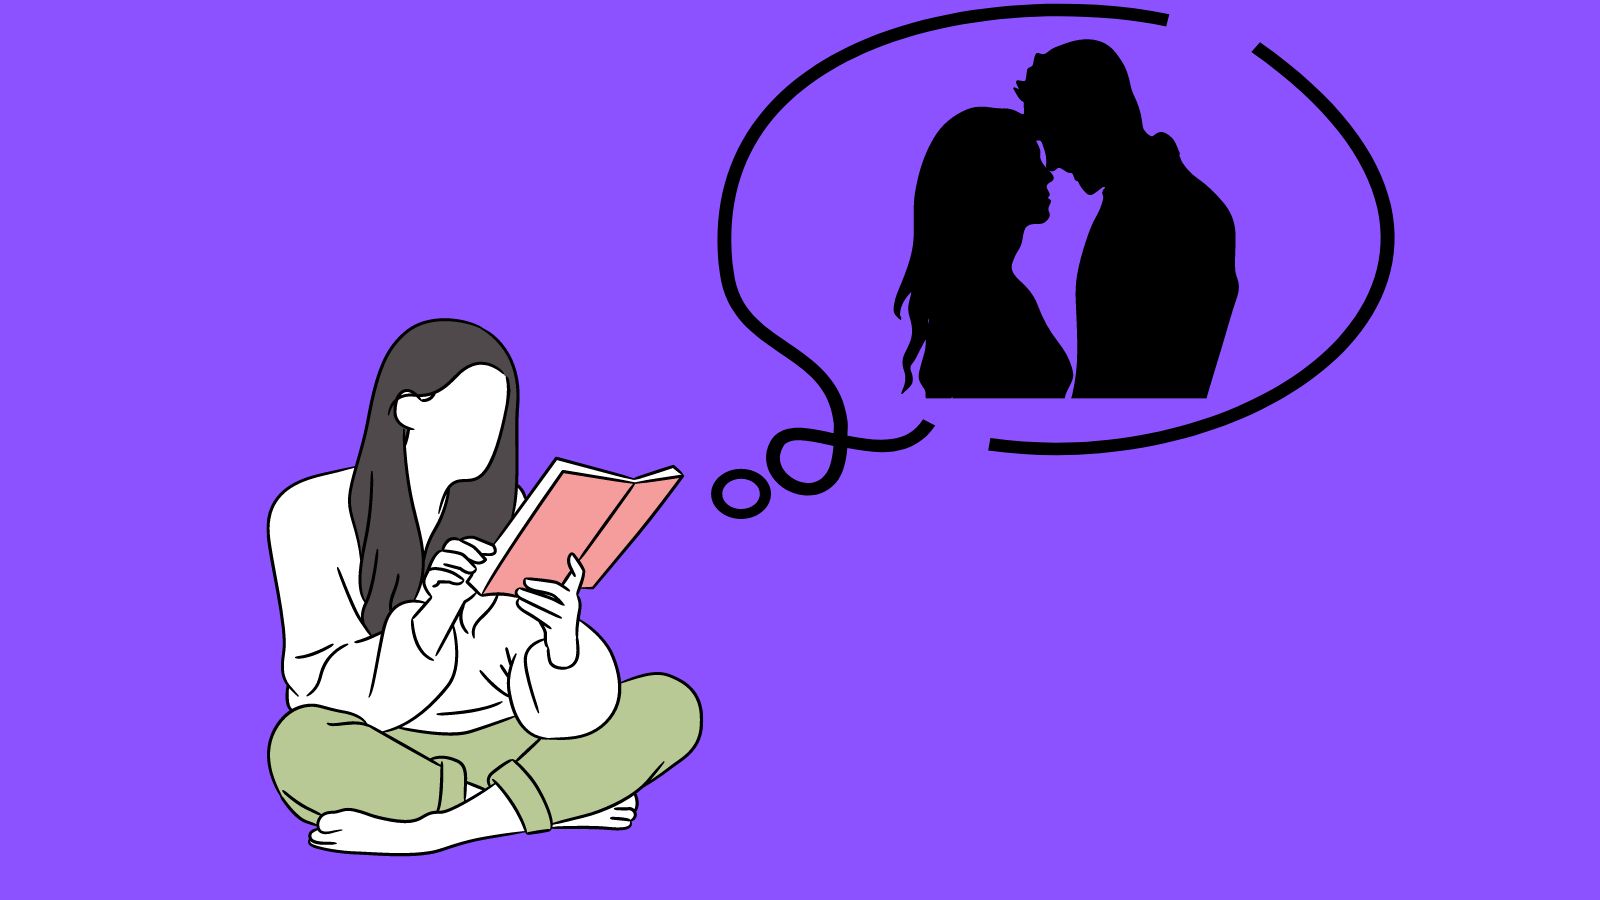 A drawing of a woman reading a book with a thought bubble of a couple coming out of it.